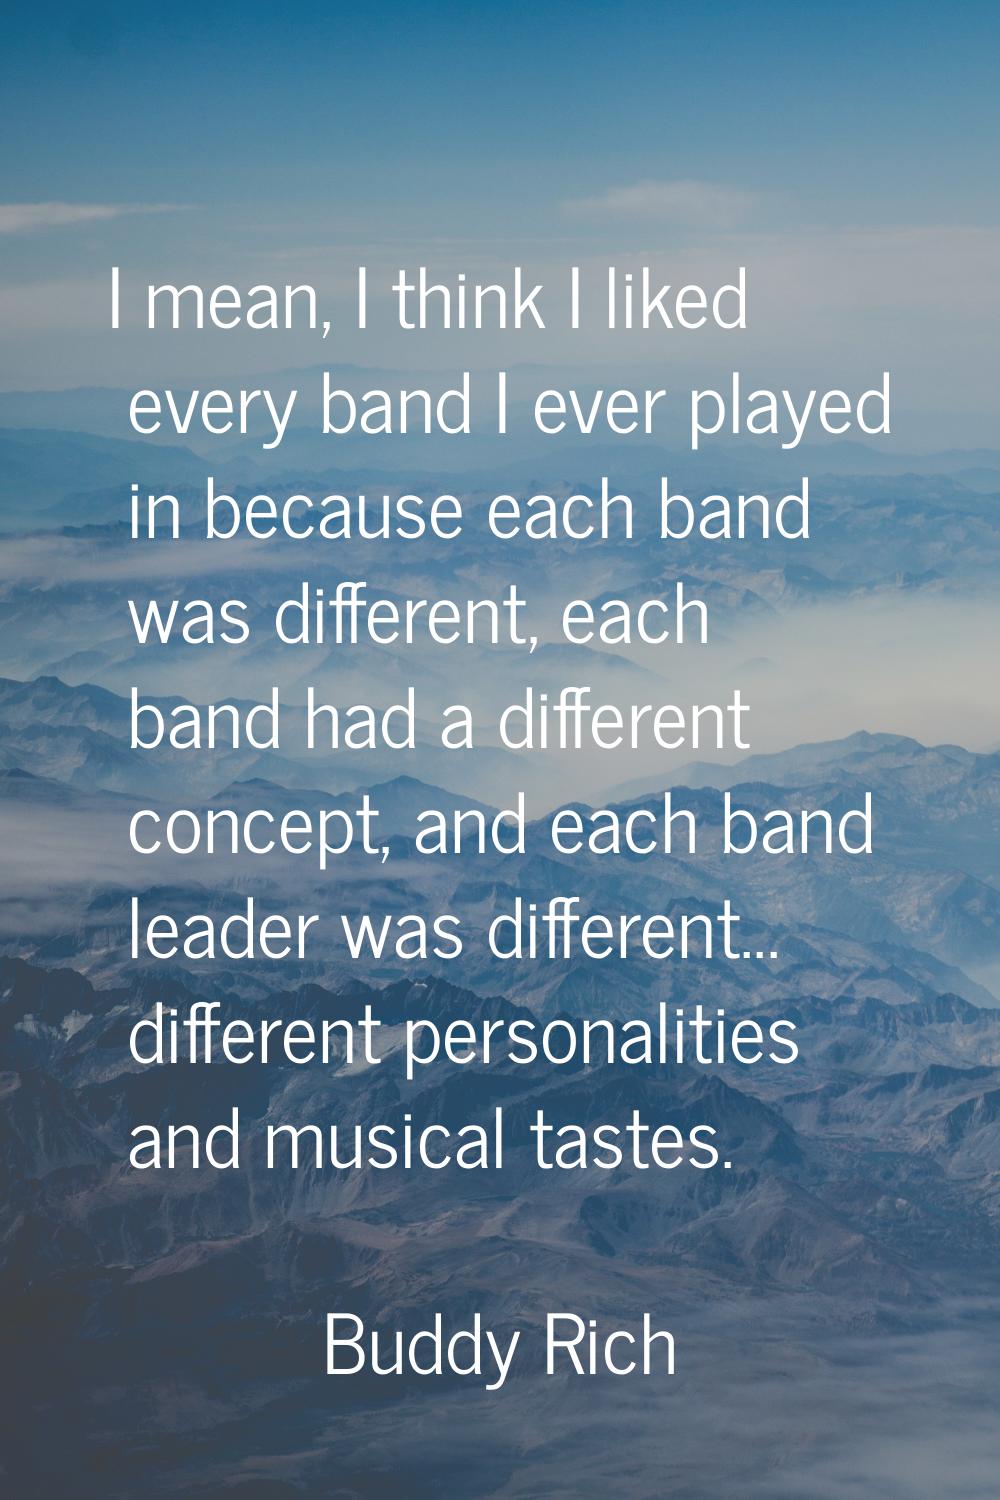 I mean, I think I liked every band I ever played in because each band was different, each band had 